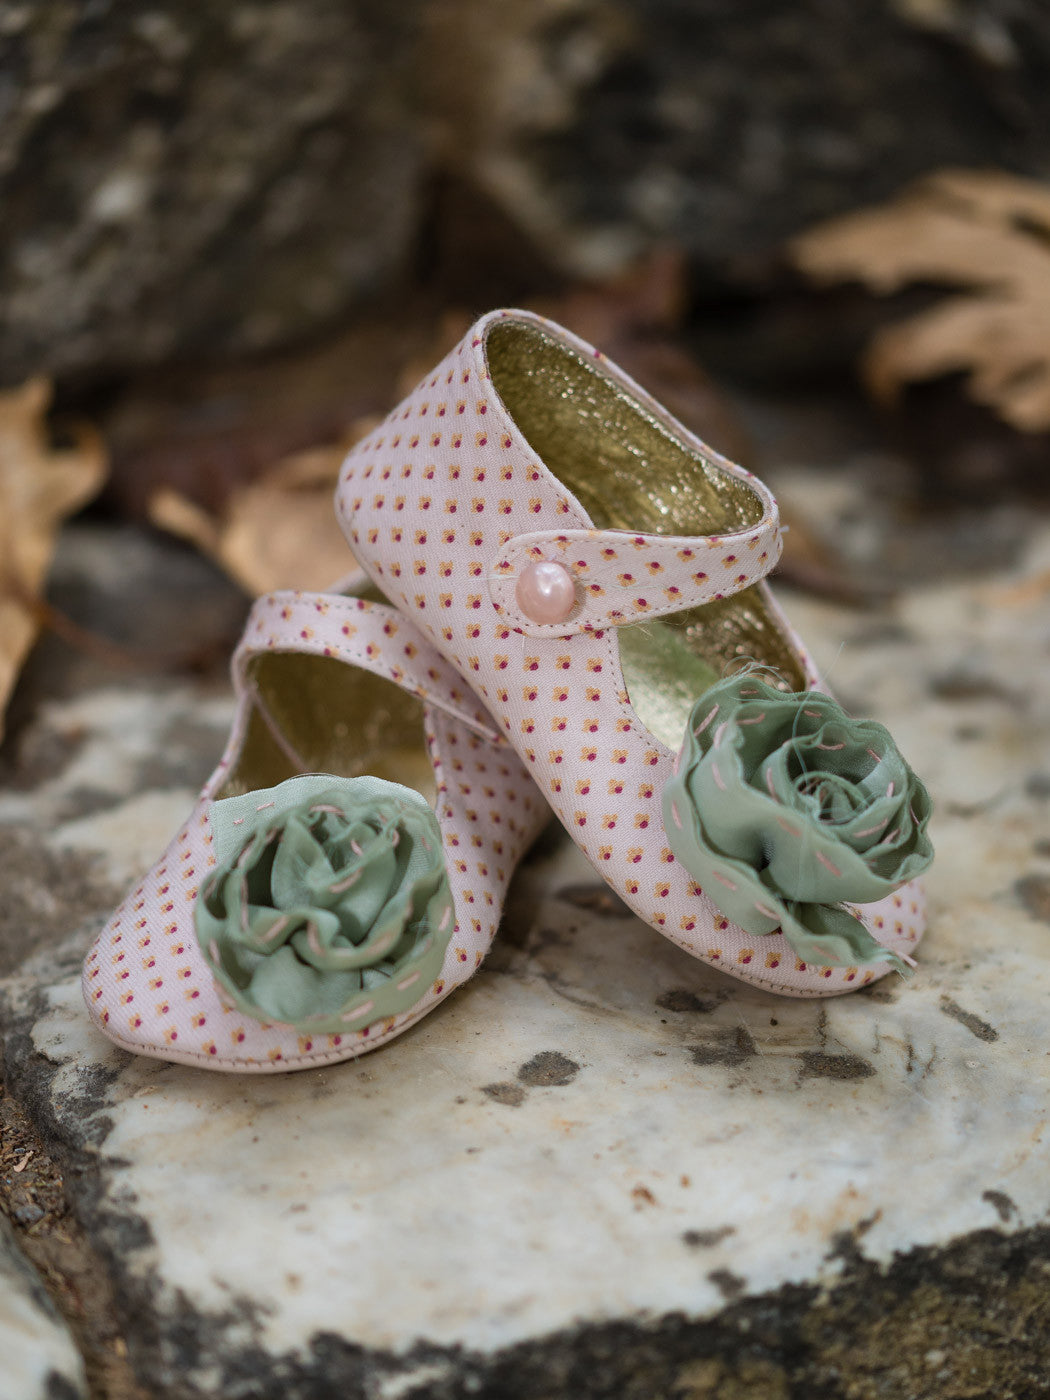 Baby's Shoe for girl with flower - Pink